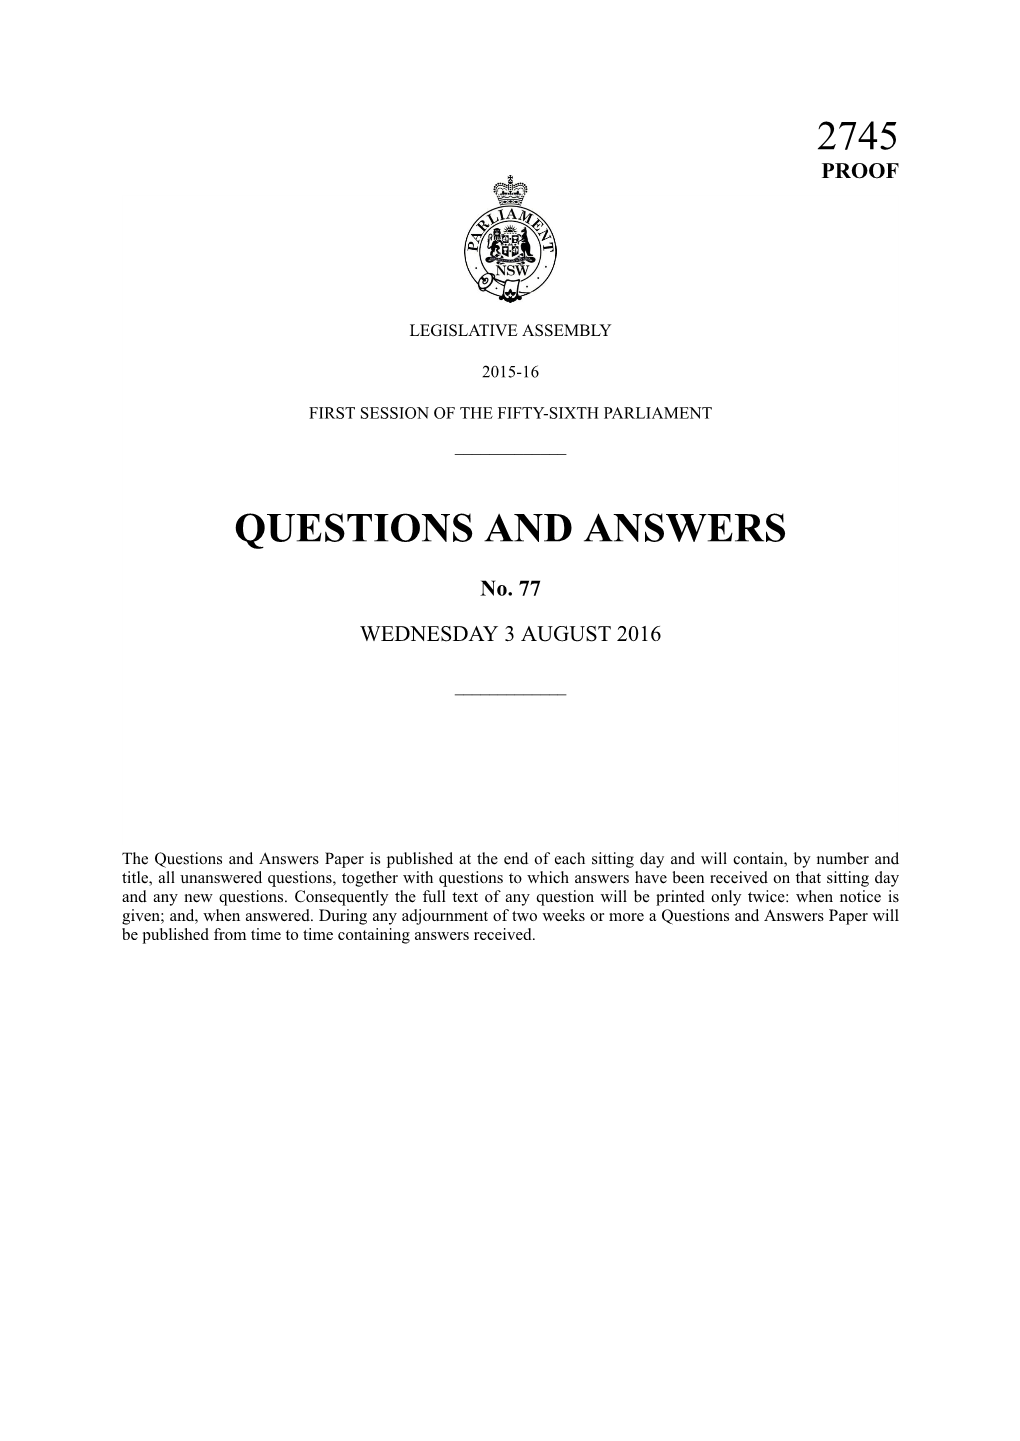 Questions and Answers 2745